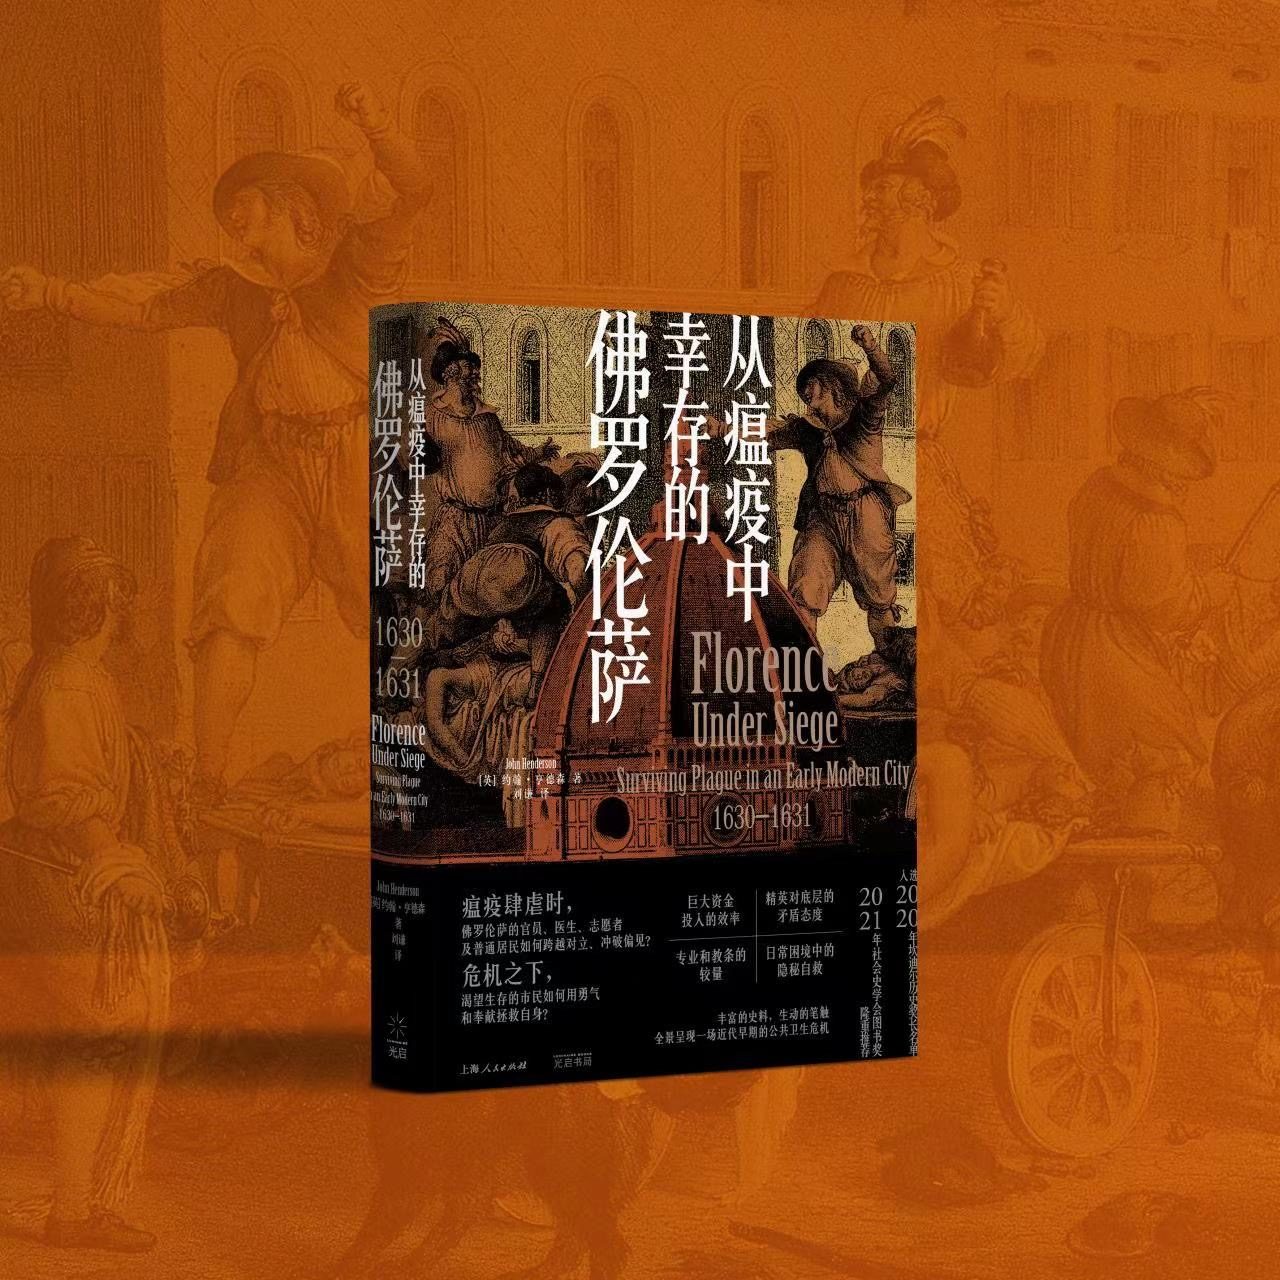 Mandarin Chinese Edition of "Florence Under Siege Surviving Plague in an Early Modern City"